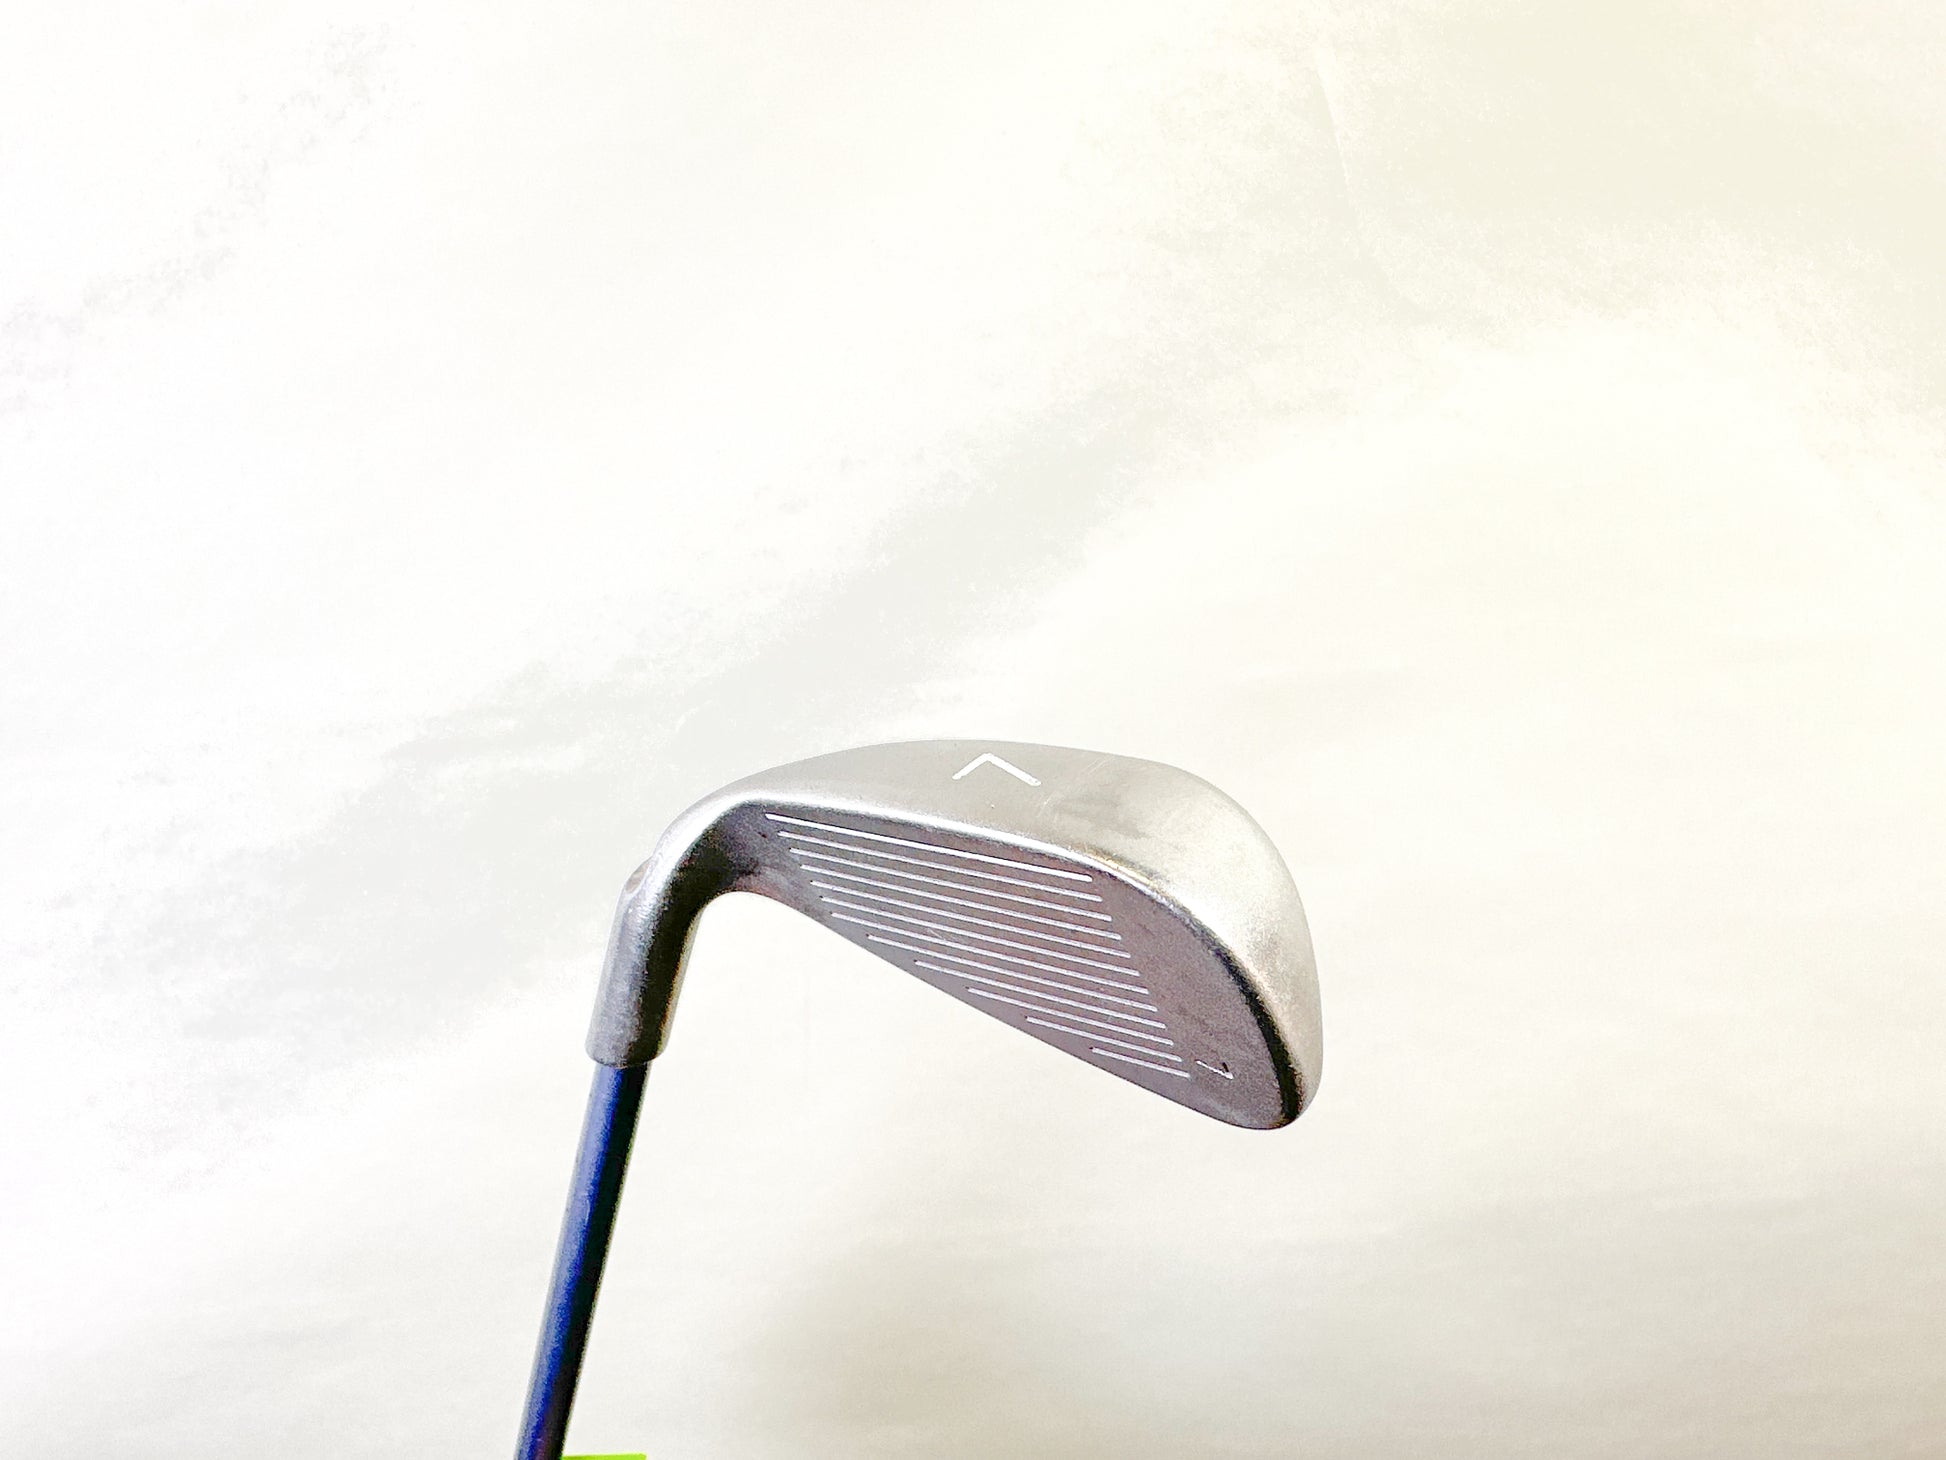 Used Ping G2 Single 7-Iron - Right-Handed - Ladies Flex-Next Round